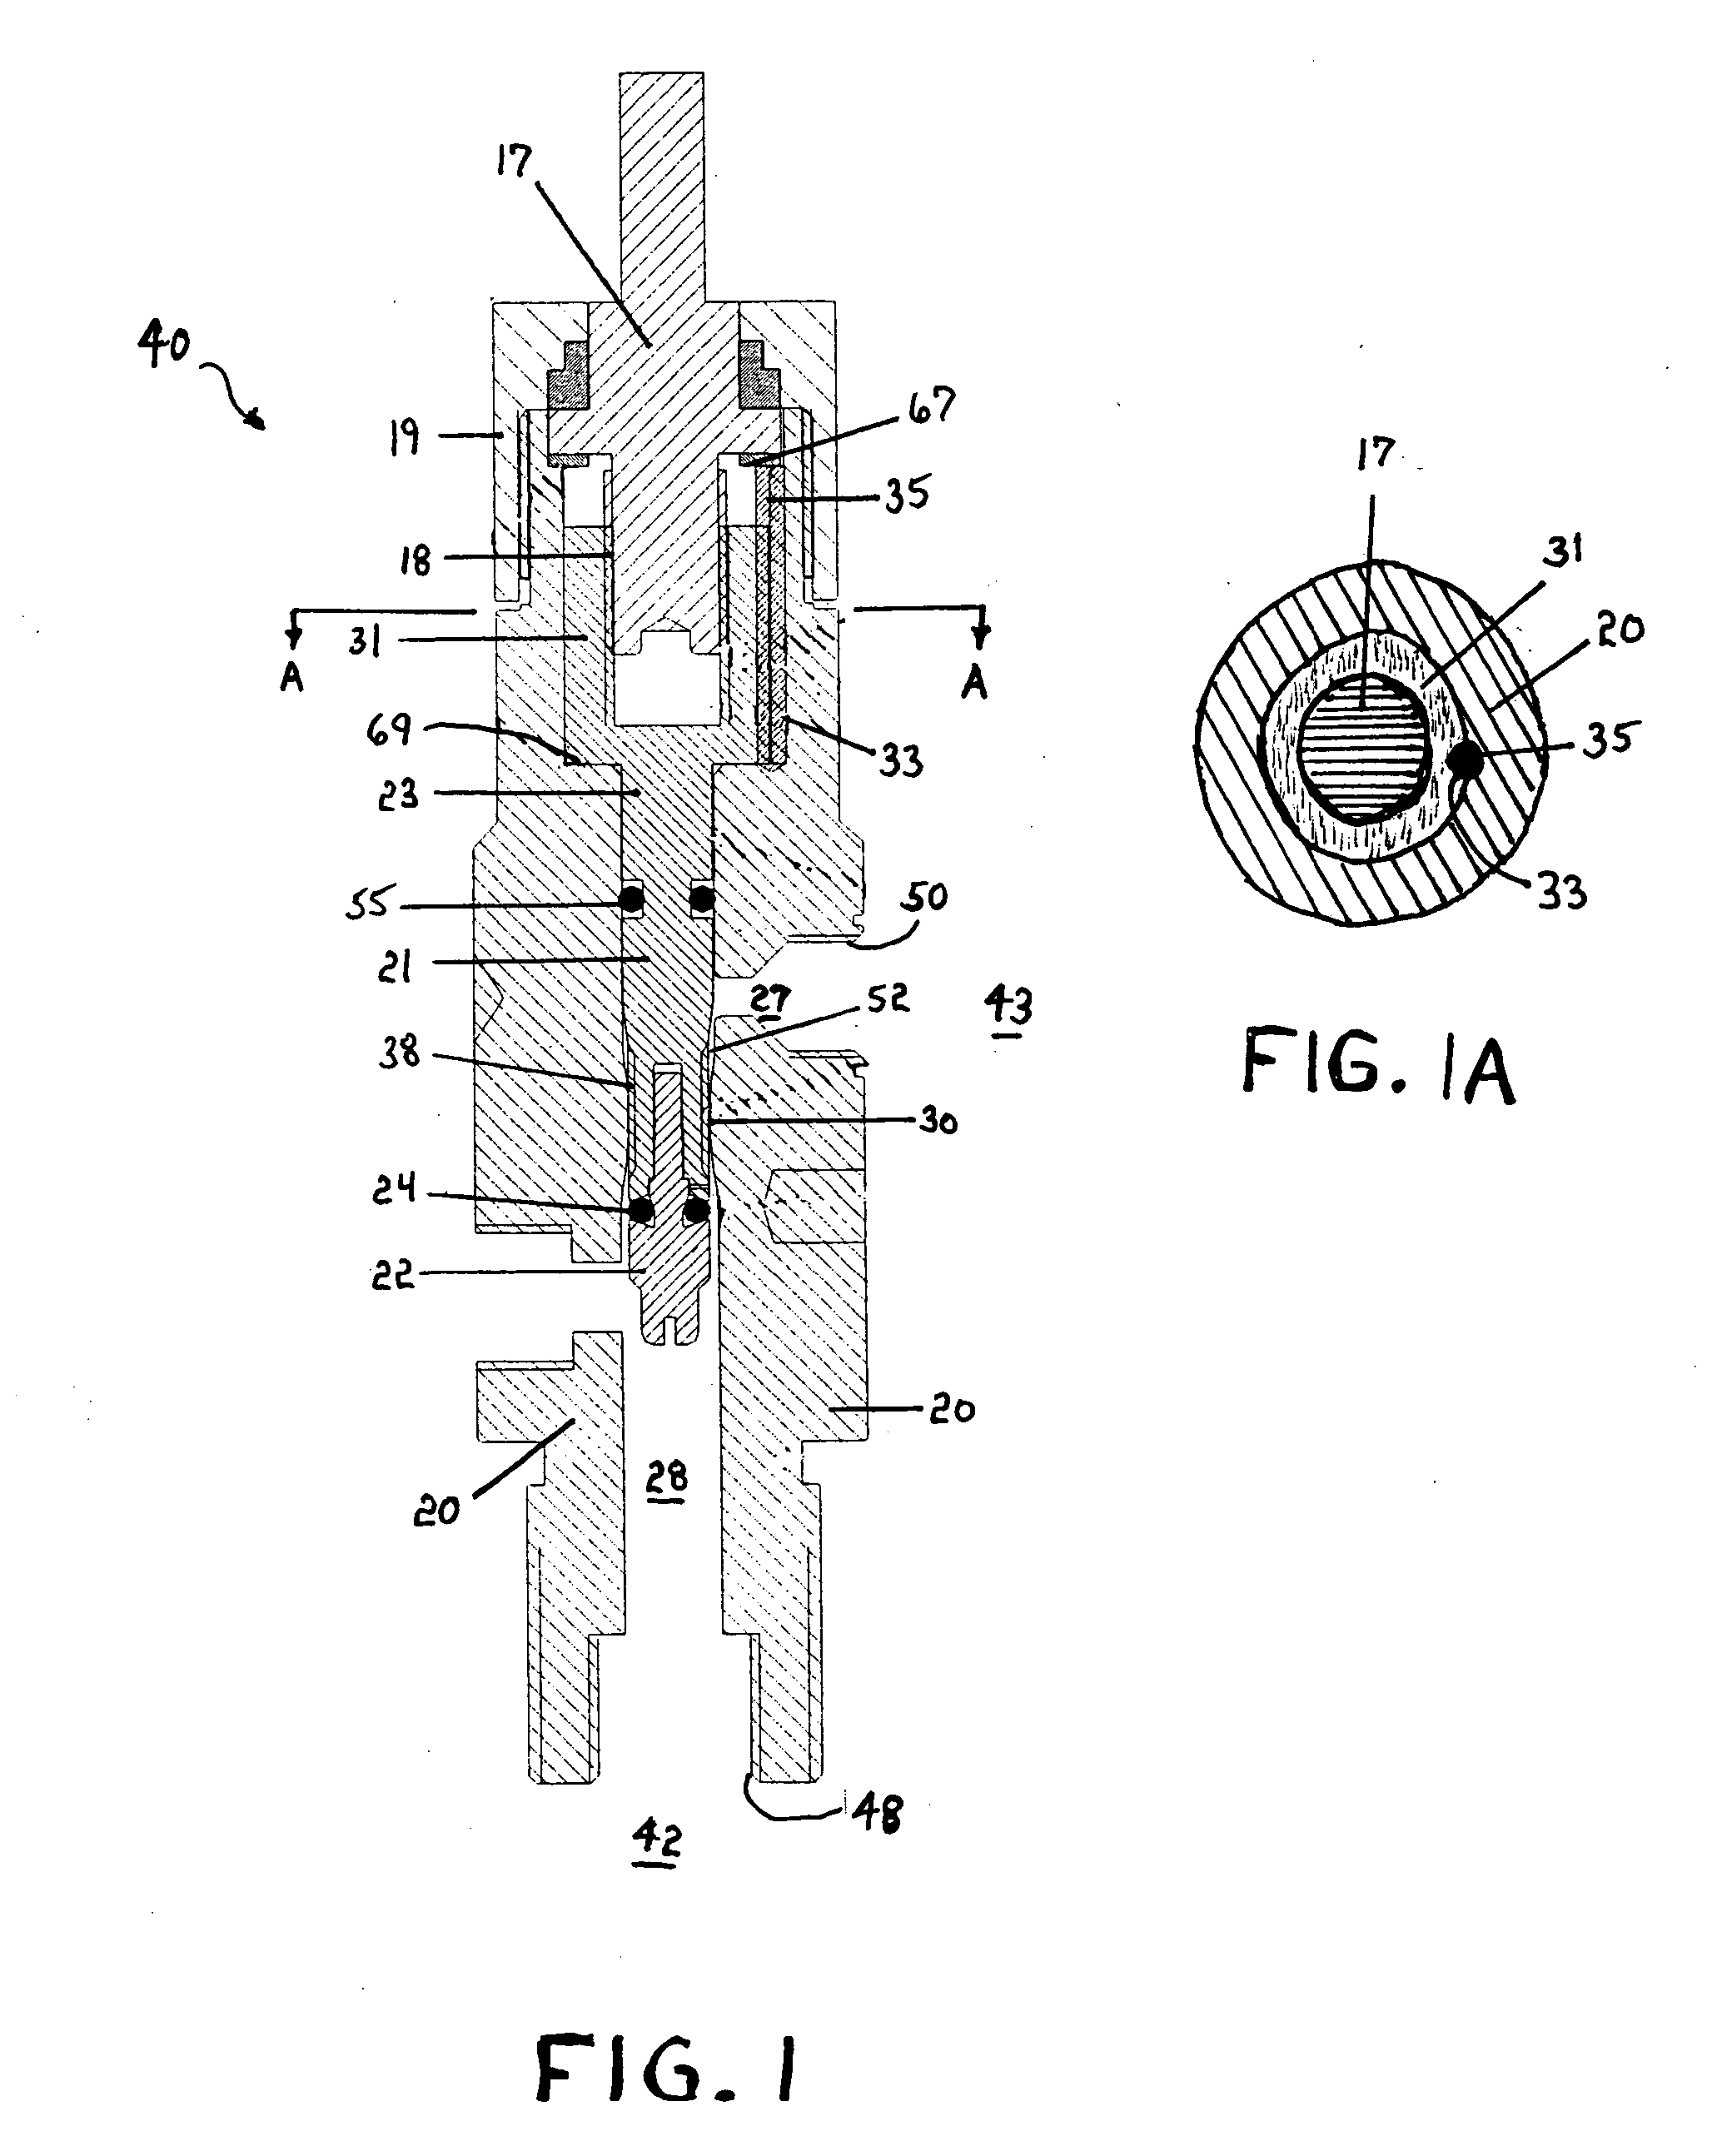 Combination valve and regulator for use with pressurized gas cylinders, particularly oxygen cylinders